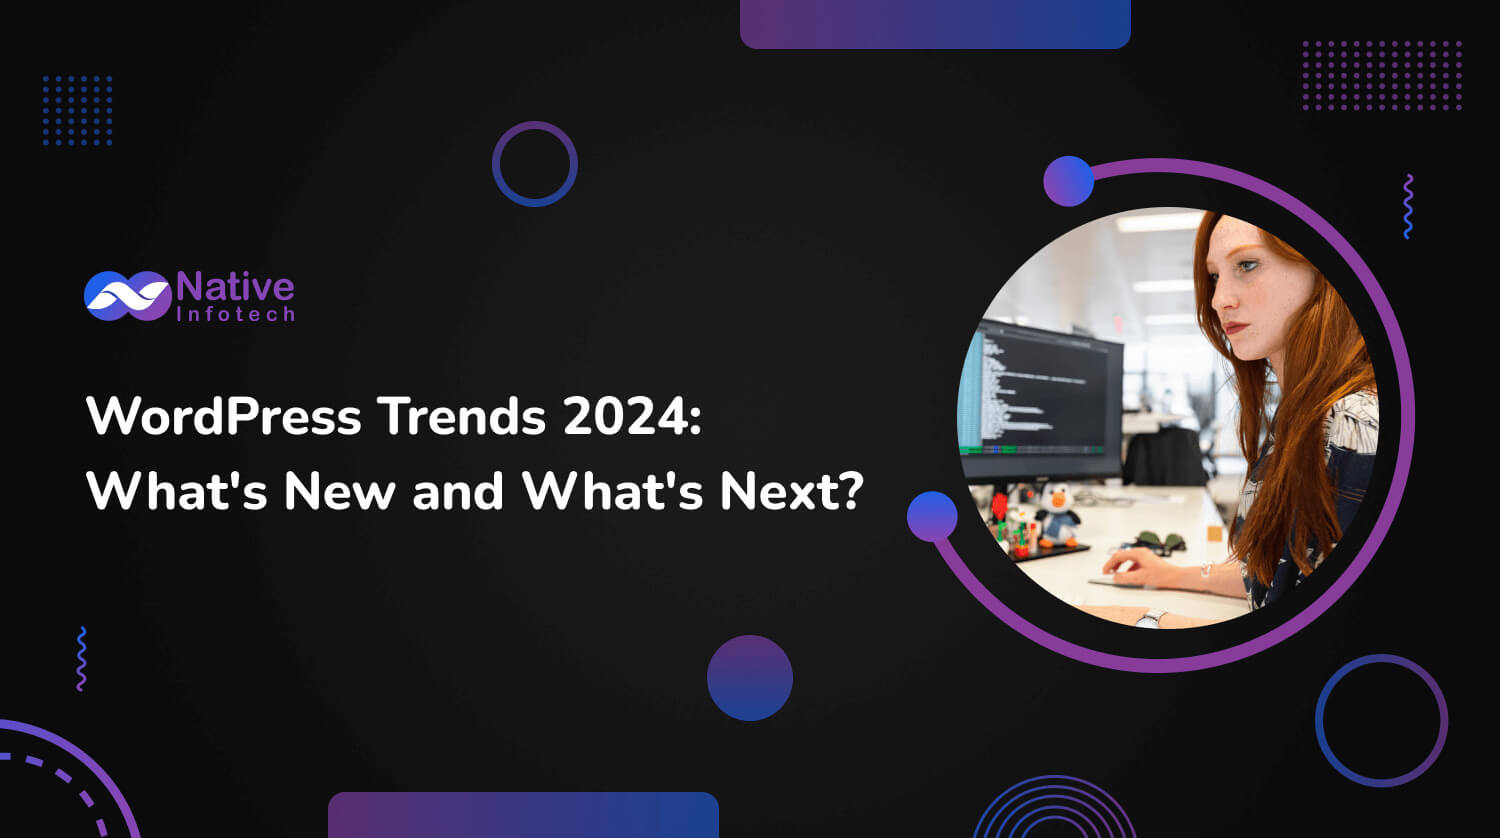 WordPress Trends 2024: What’s New and What’s Next? | Native Infotech